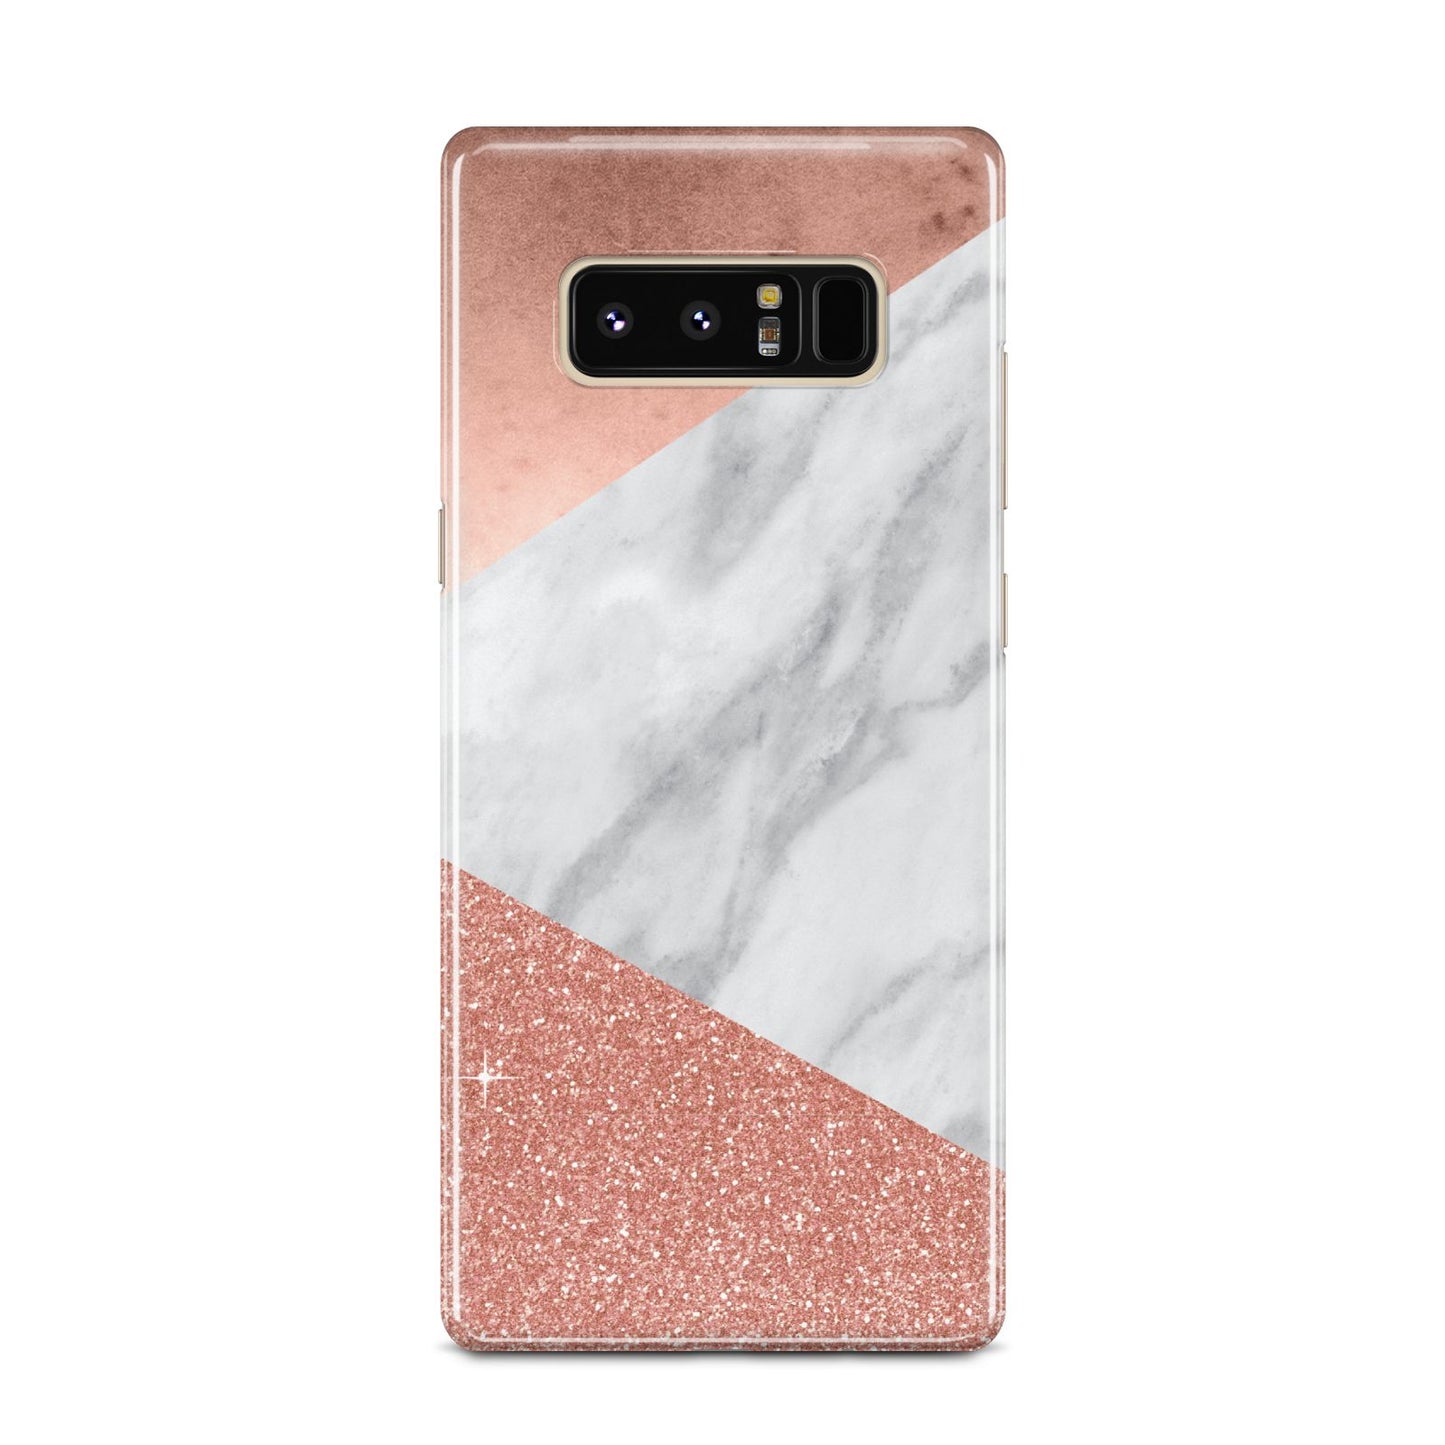 Marble Rose Gold Foil Samsung Galaxy Note 8 Case